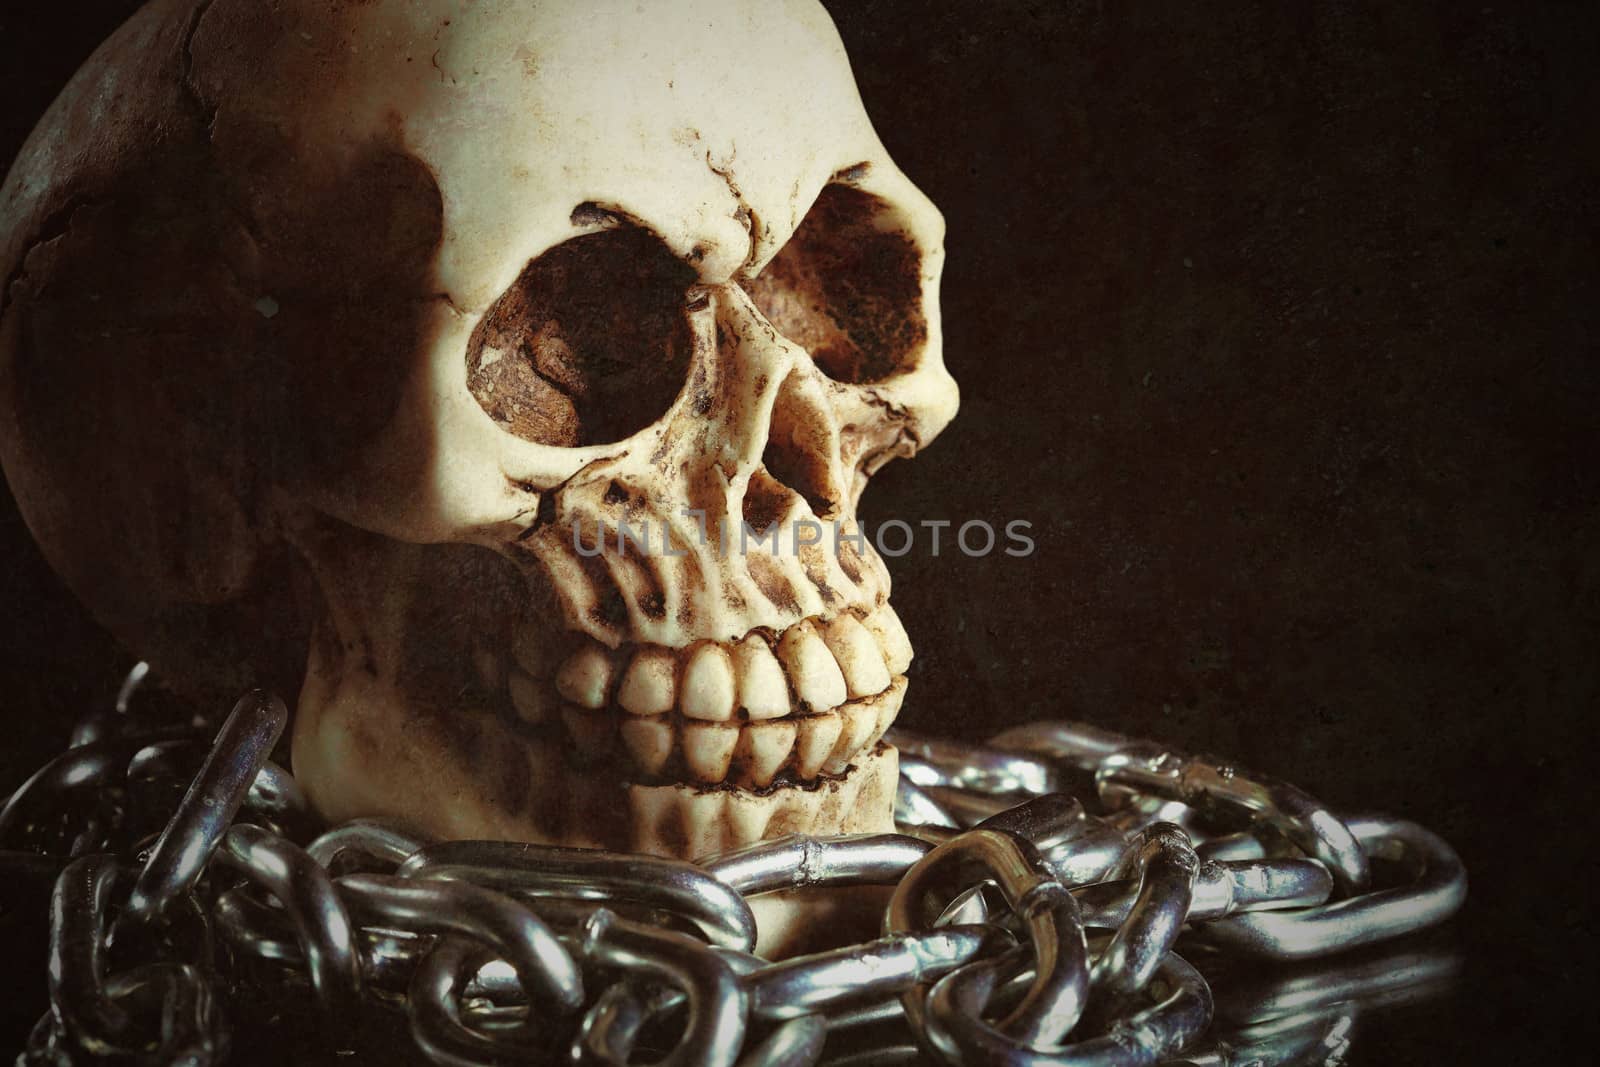 macabre scene with an human skull and chains